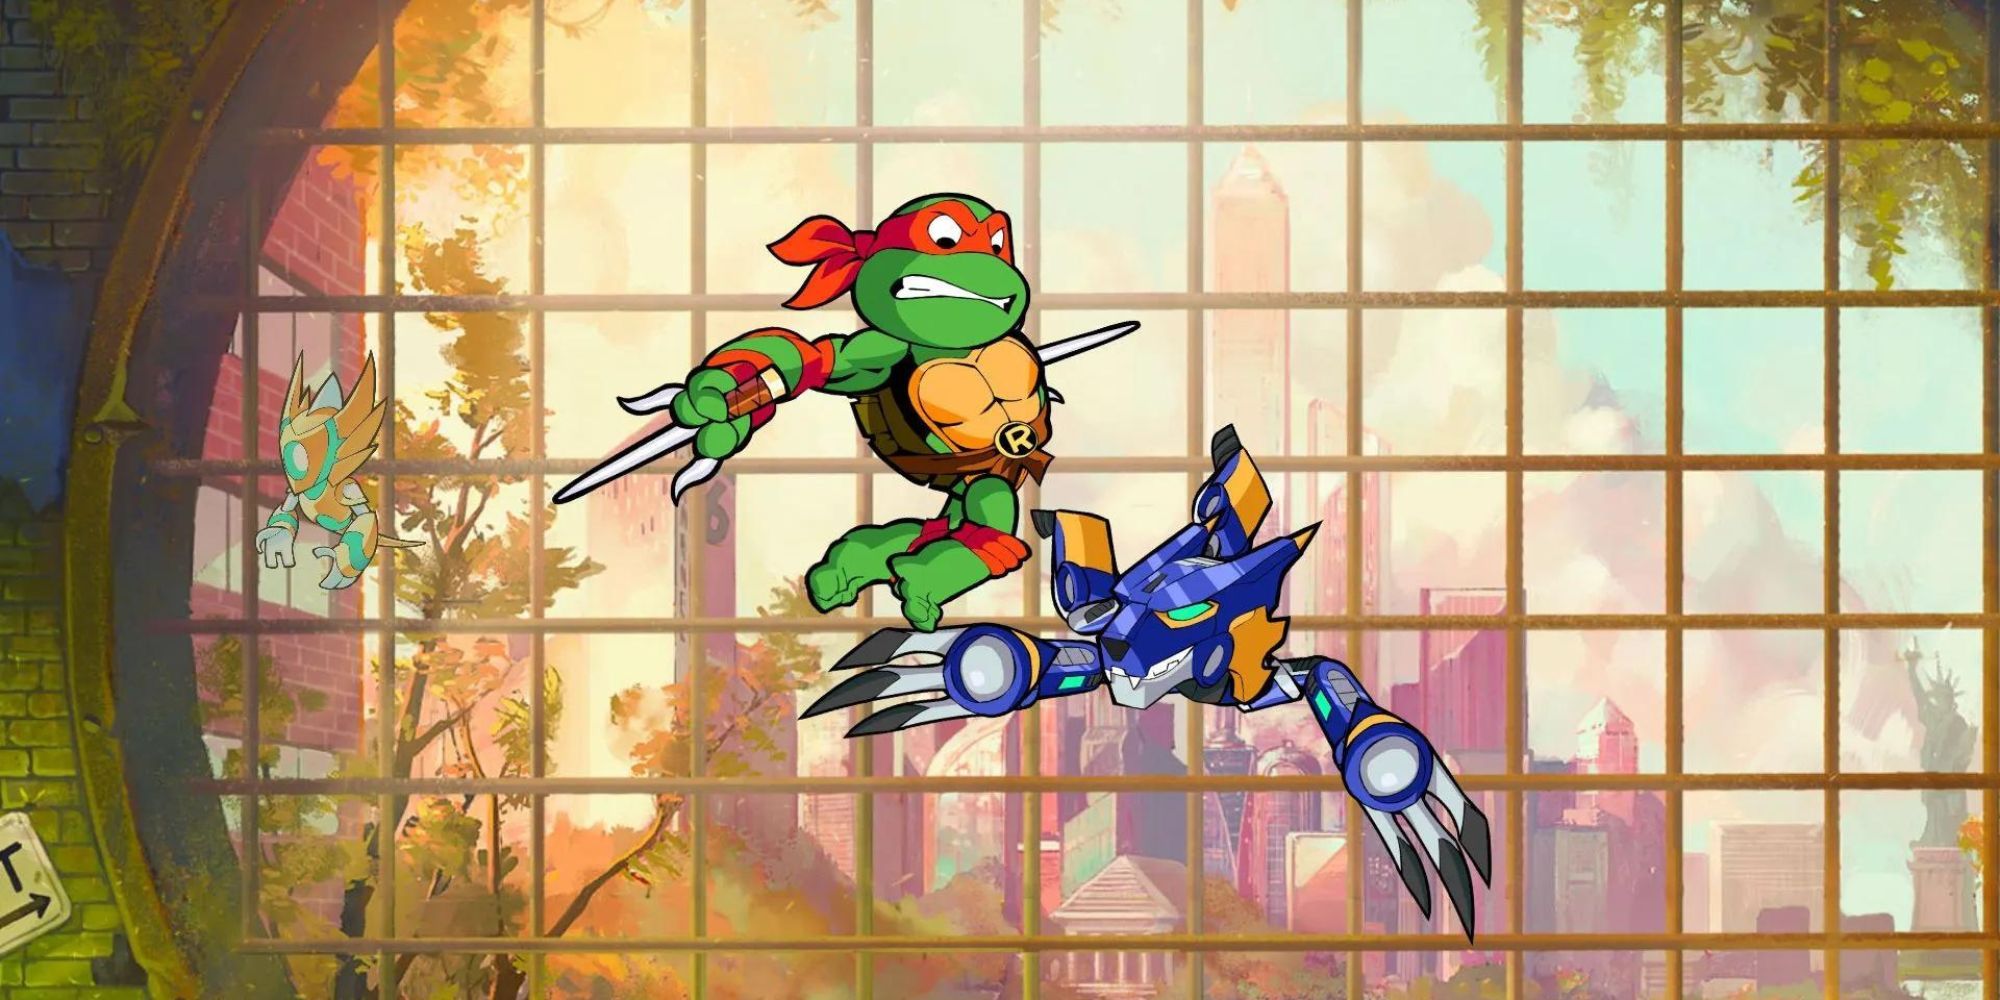 Raphael strikes down an opponent in Brawlhalla